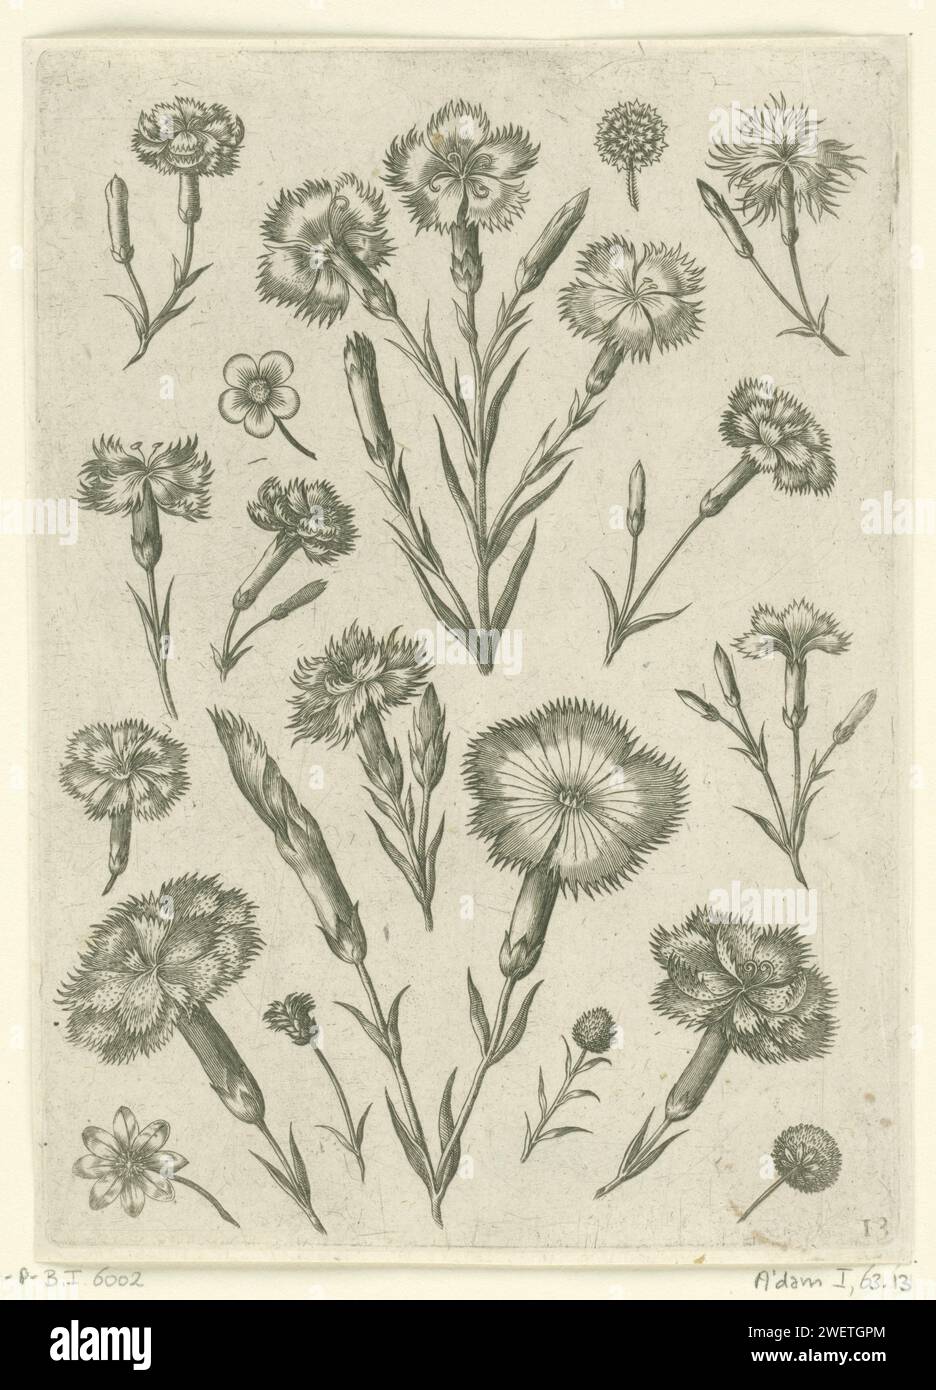 Diverse anjers, 1570 - before 1618 print Leaf 13 of 21 numbered sheets with title page from a series of 24.  paper engraving flowers Stock Photo